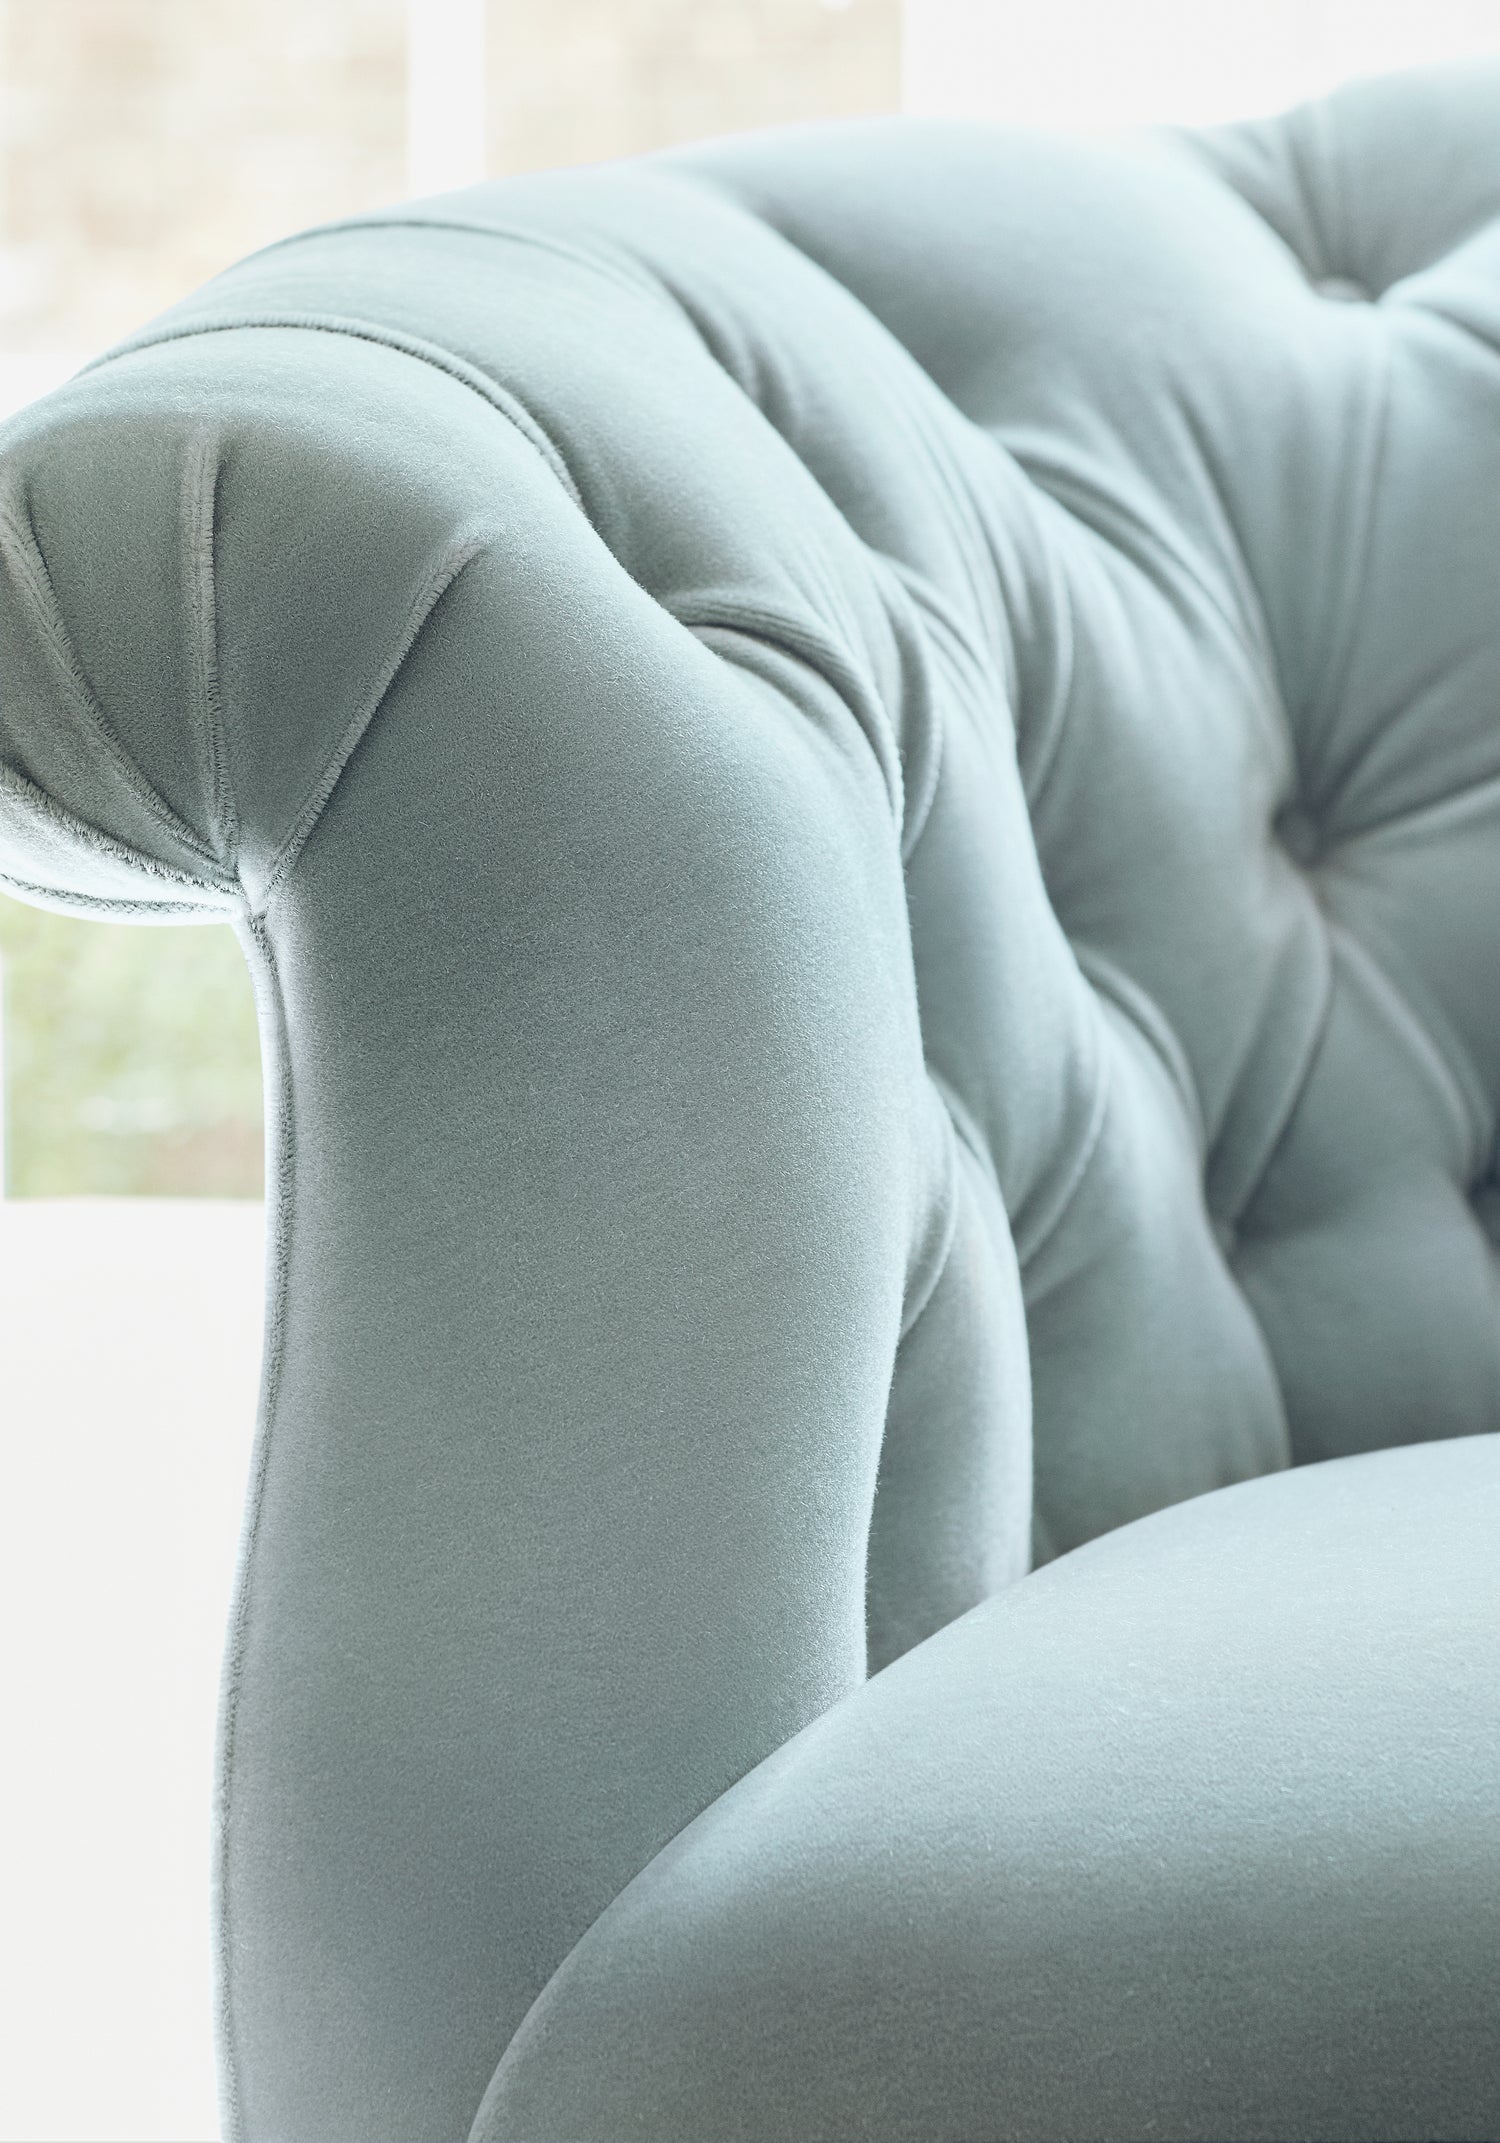 Detailed Miles Mohair Velvet woven fabric in cloud color - pattern number W72827 by Thibaut in the Woven Resource Vol 13 Fusion Velvets collection